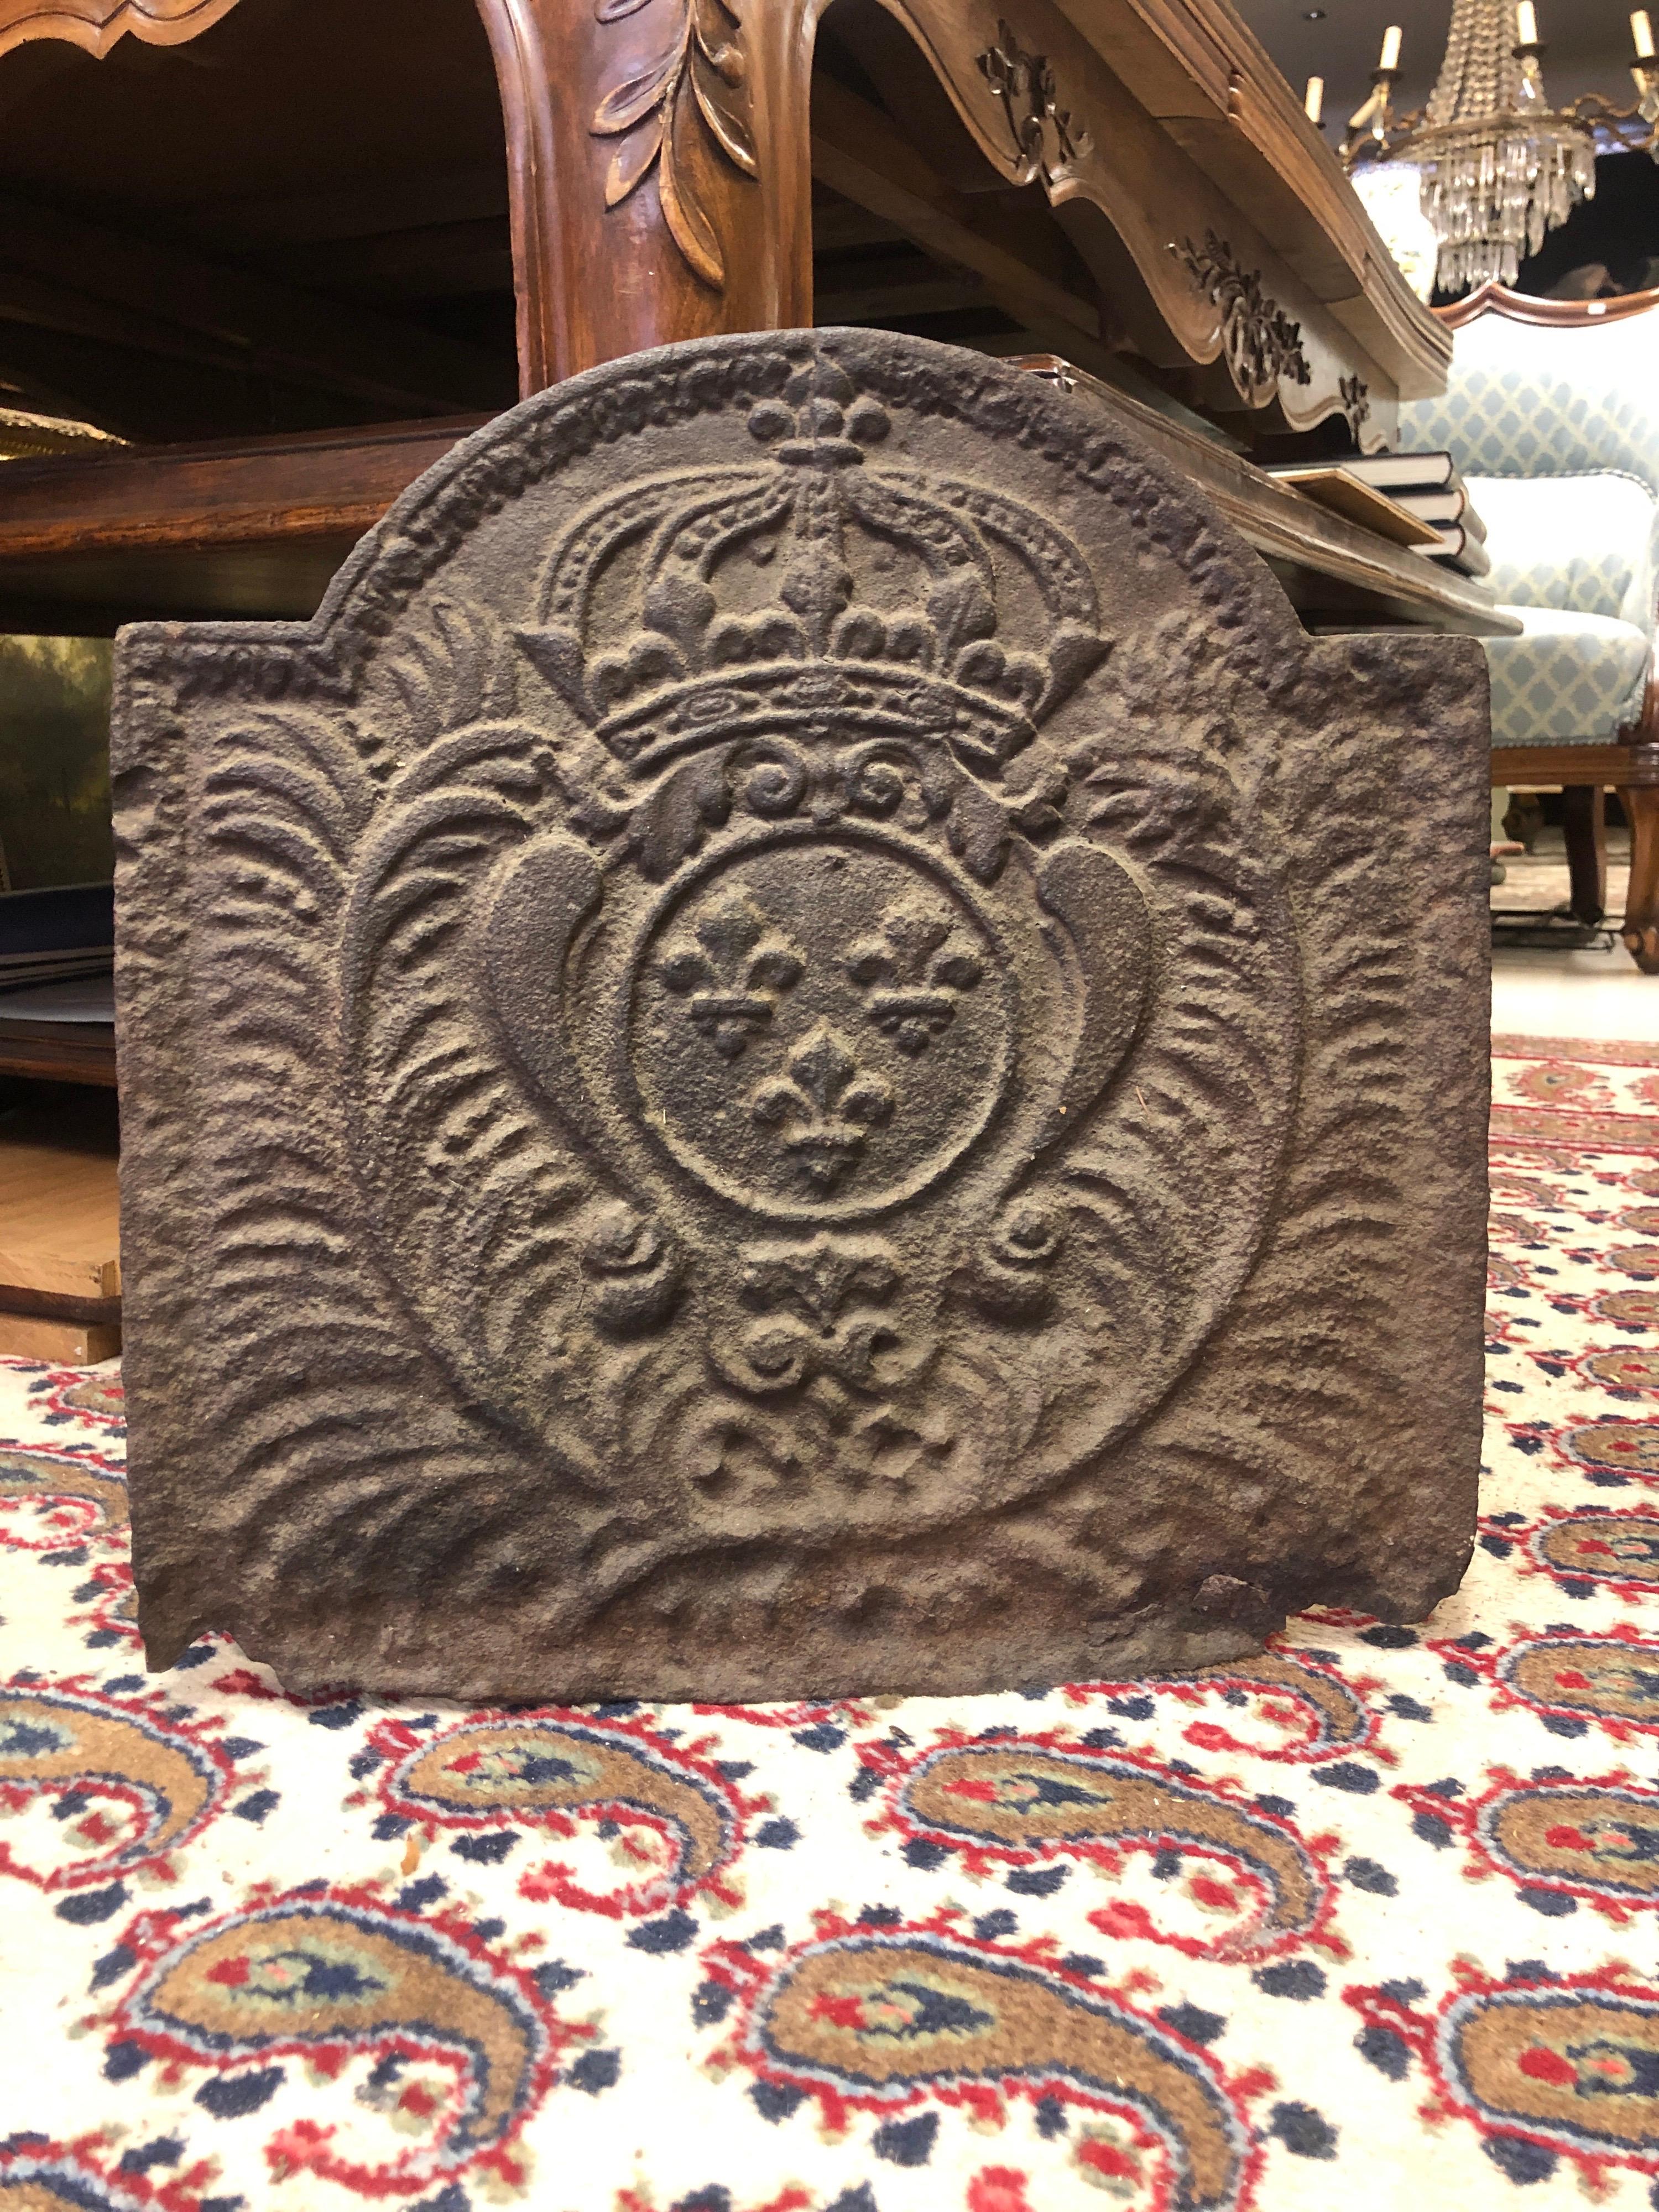 This antique iron fire back plaque was crafted in France, circa 1800.
This forged piece could be used inside a fireplace hearth to re-direct heat, or as a back splash behind the stove in a kitchen.